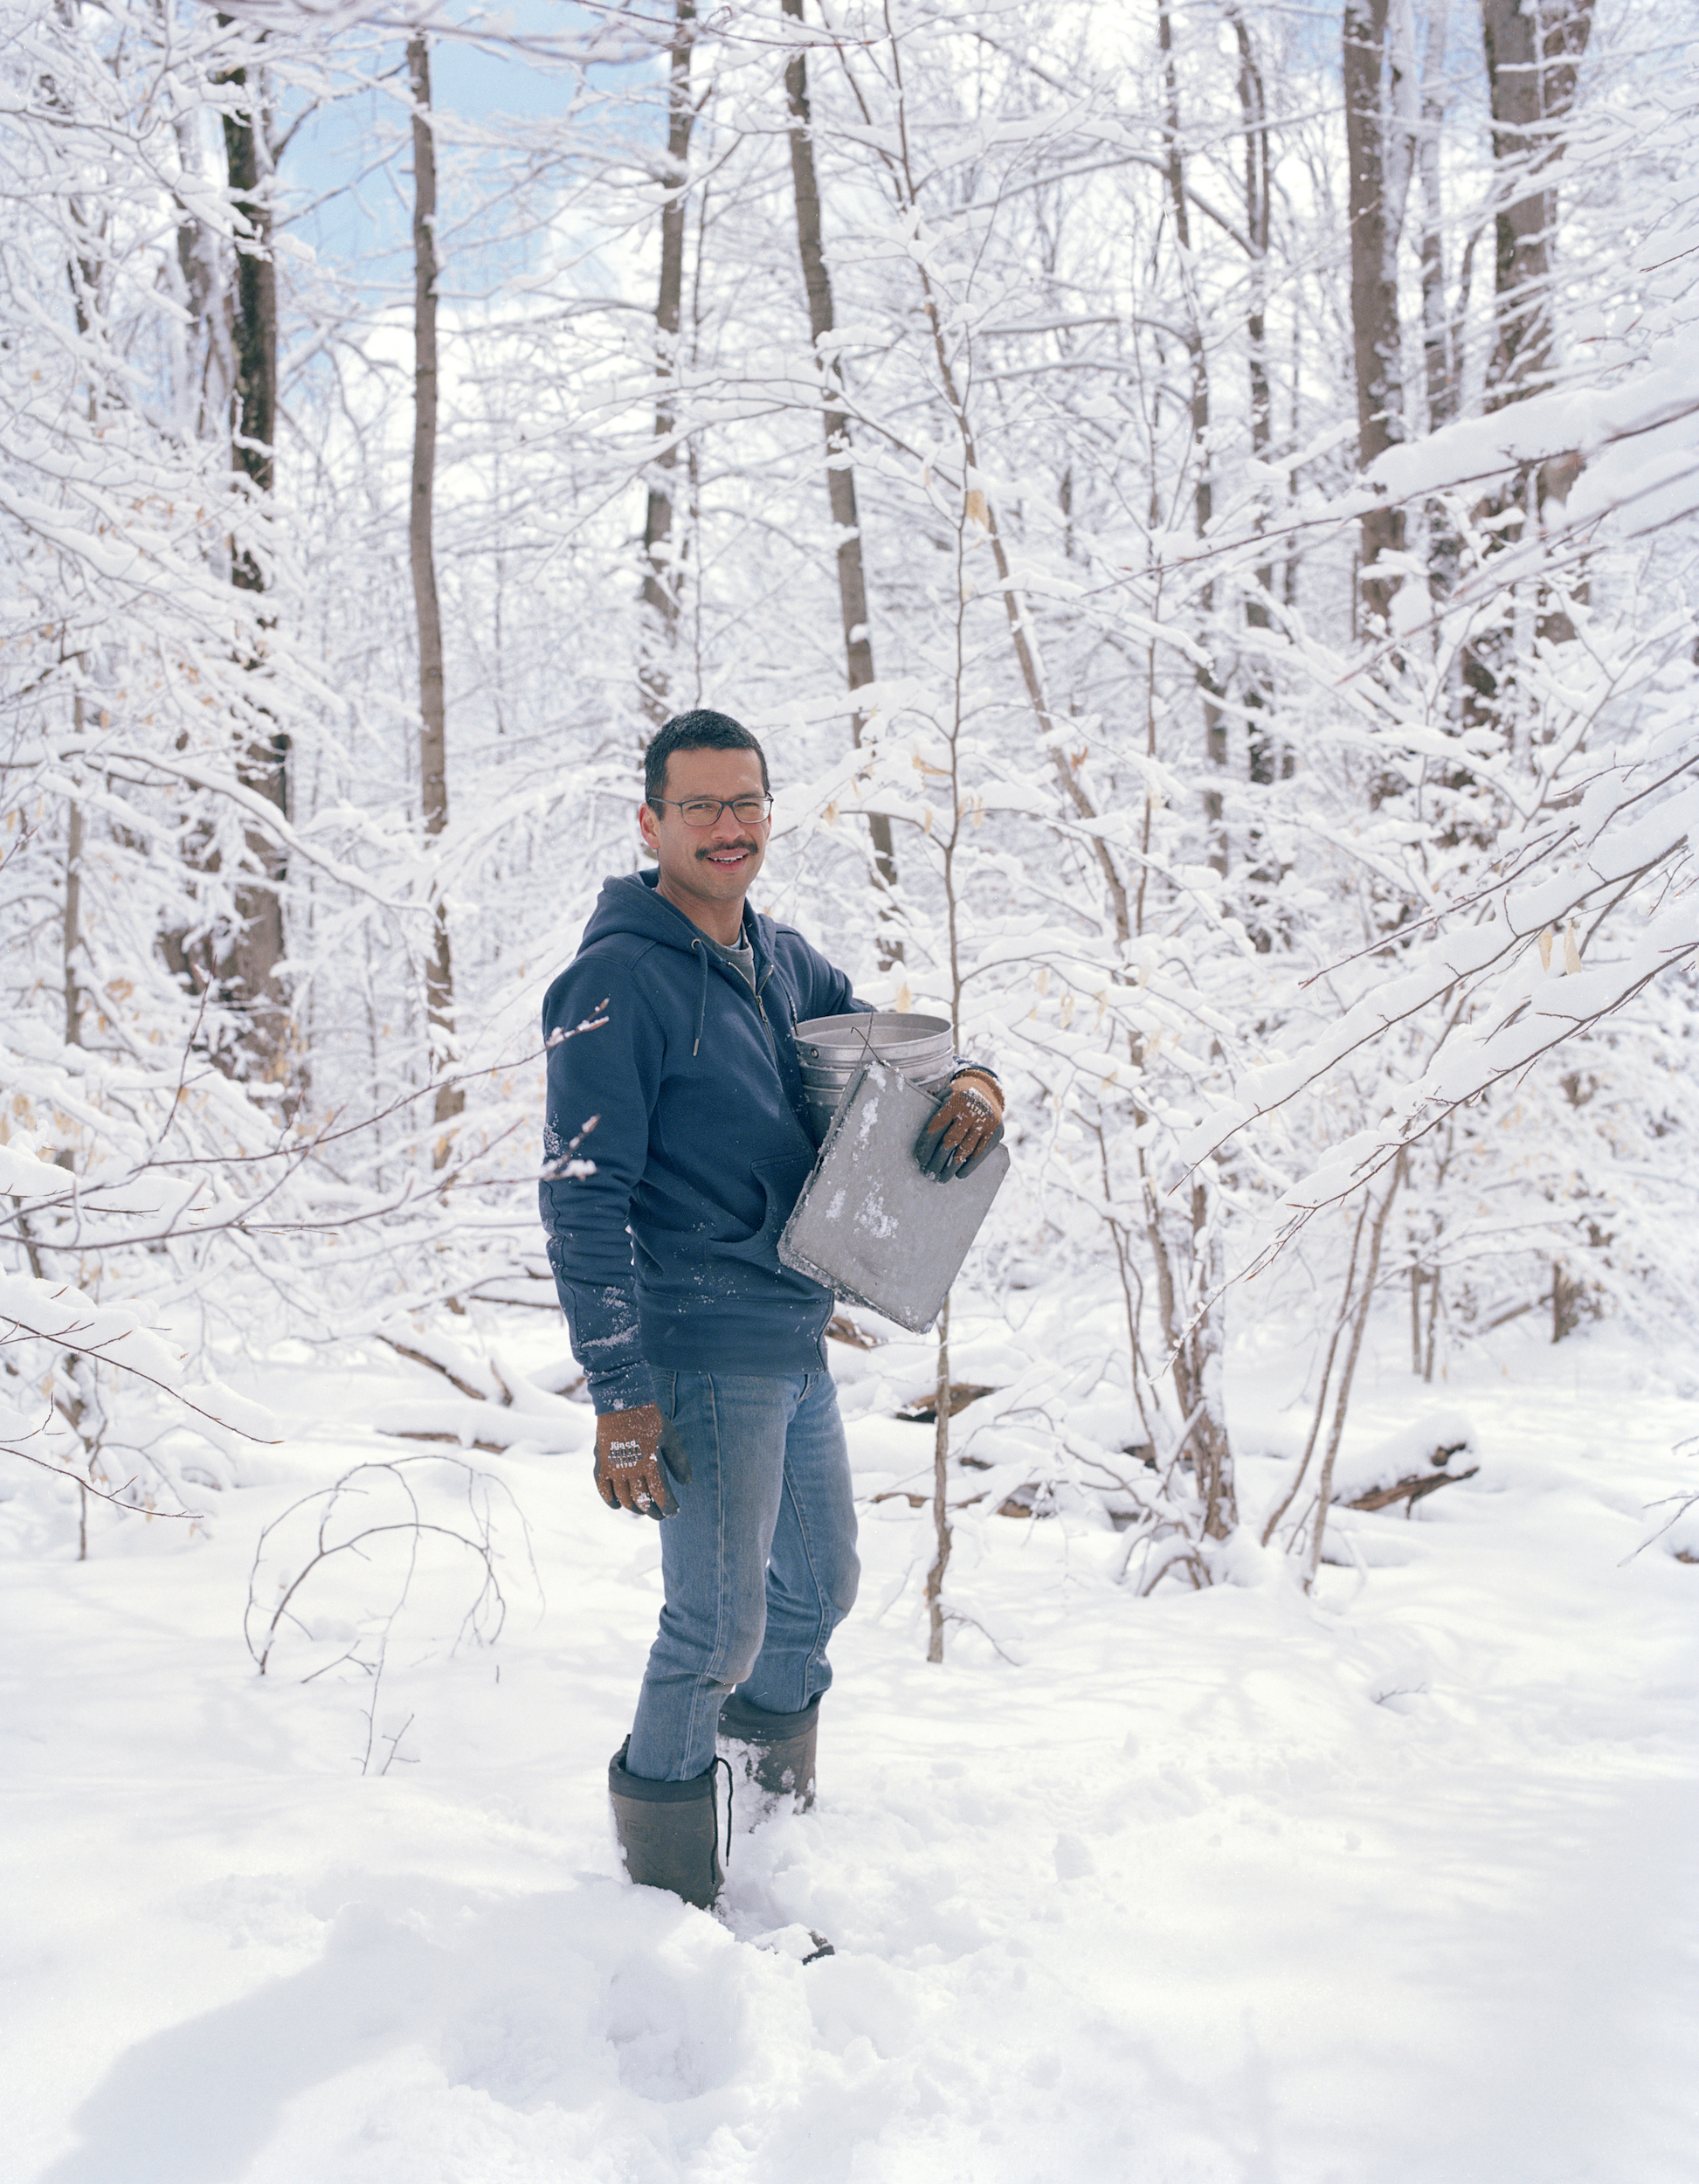  Simon collecting sap buckets in January 2018, a few weeks before him and Robert moved to Detroit. They moved to Stamford from New York City.  